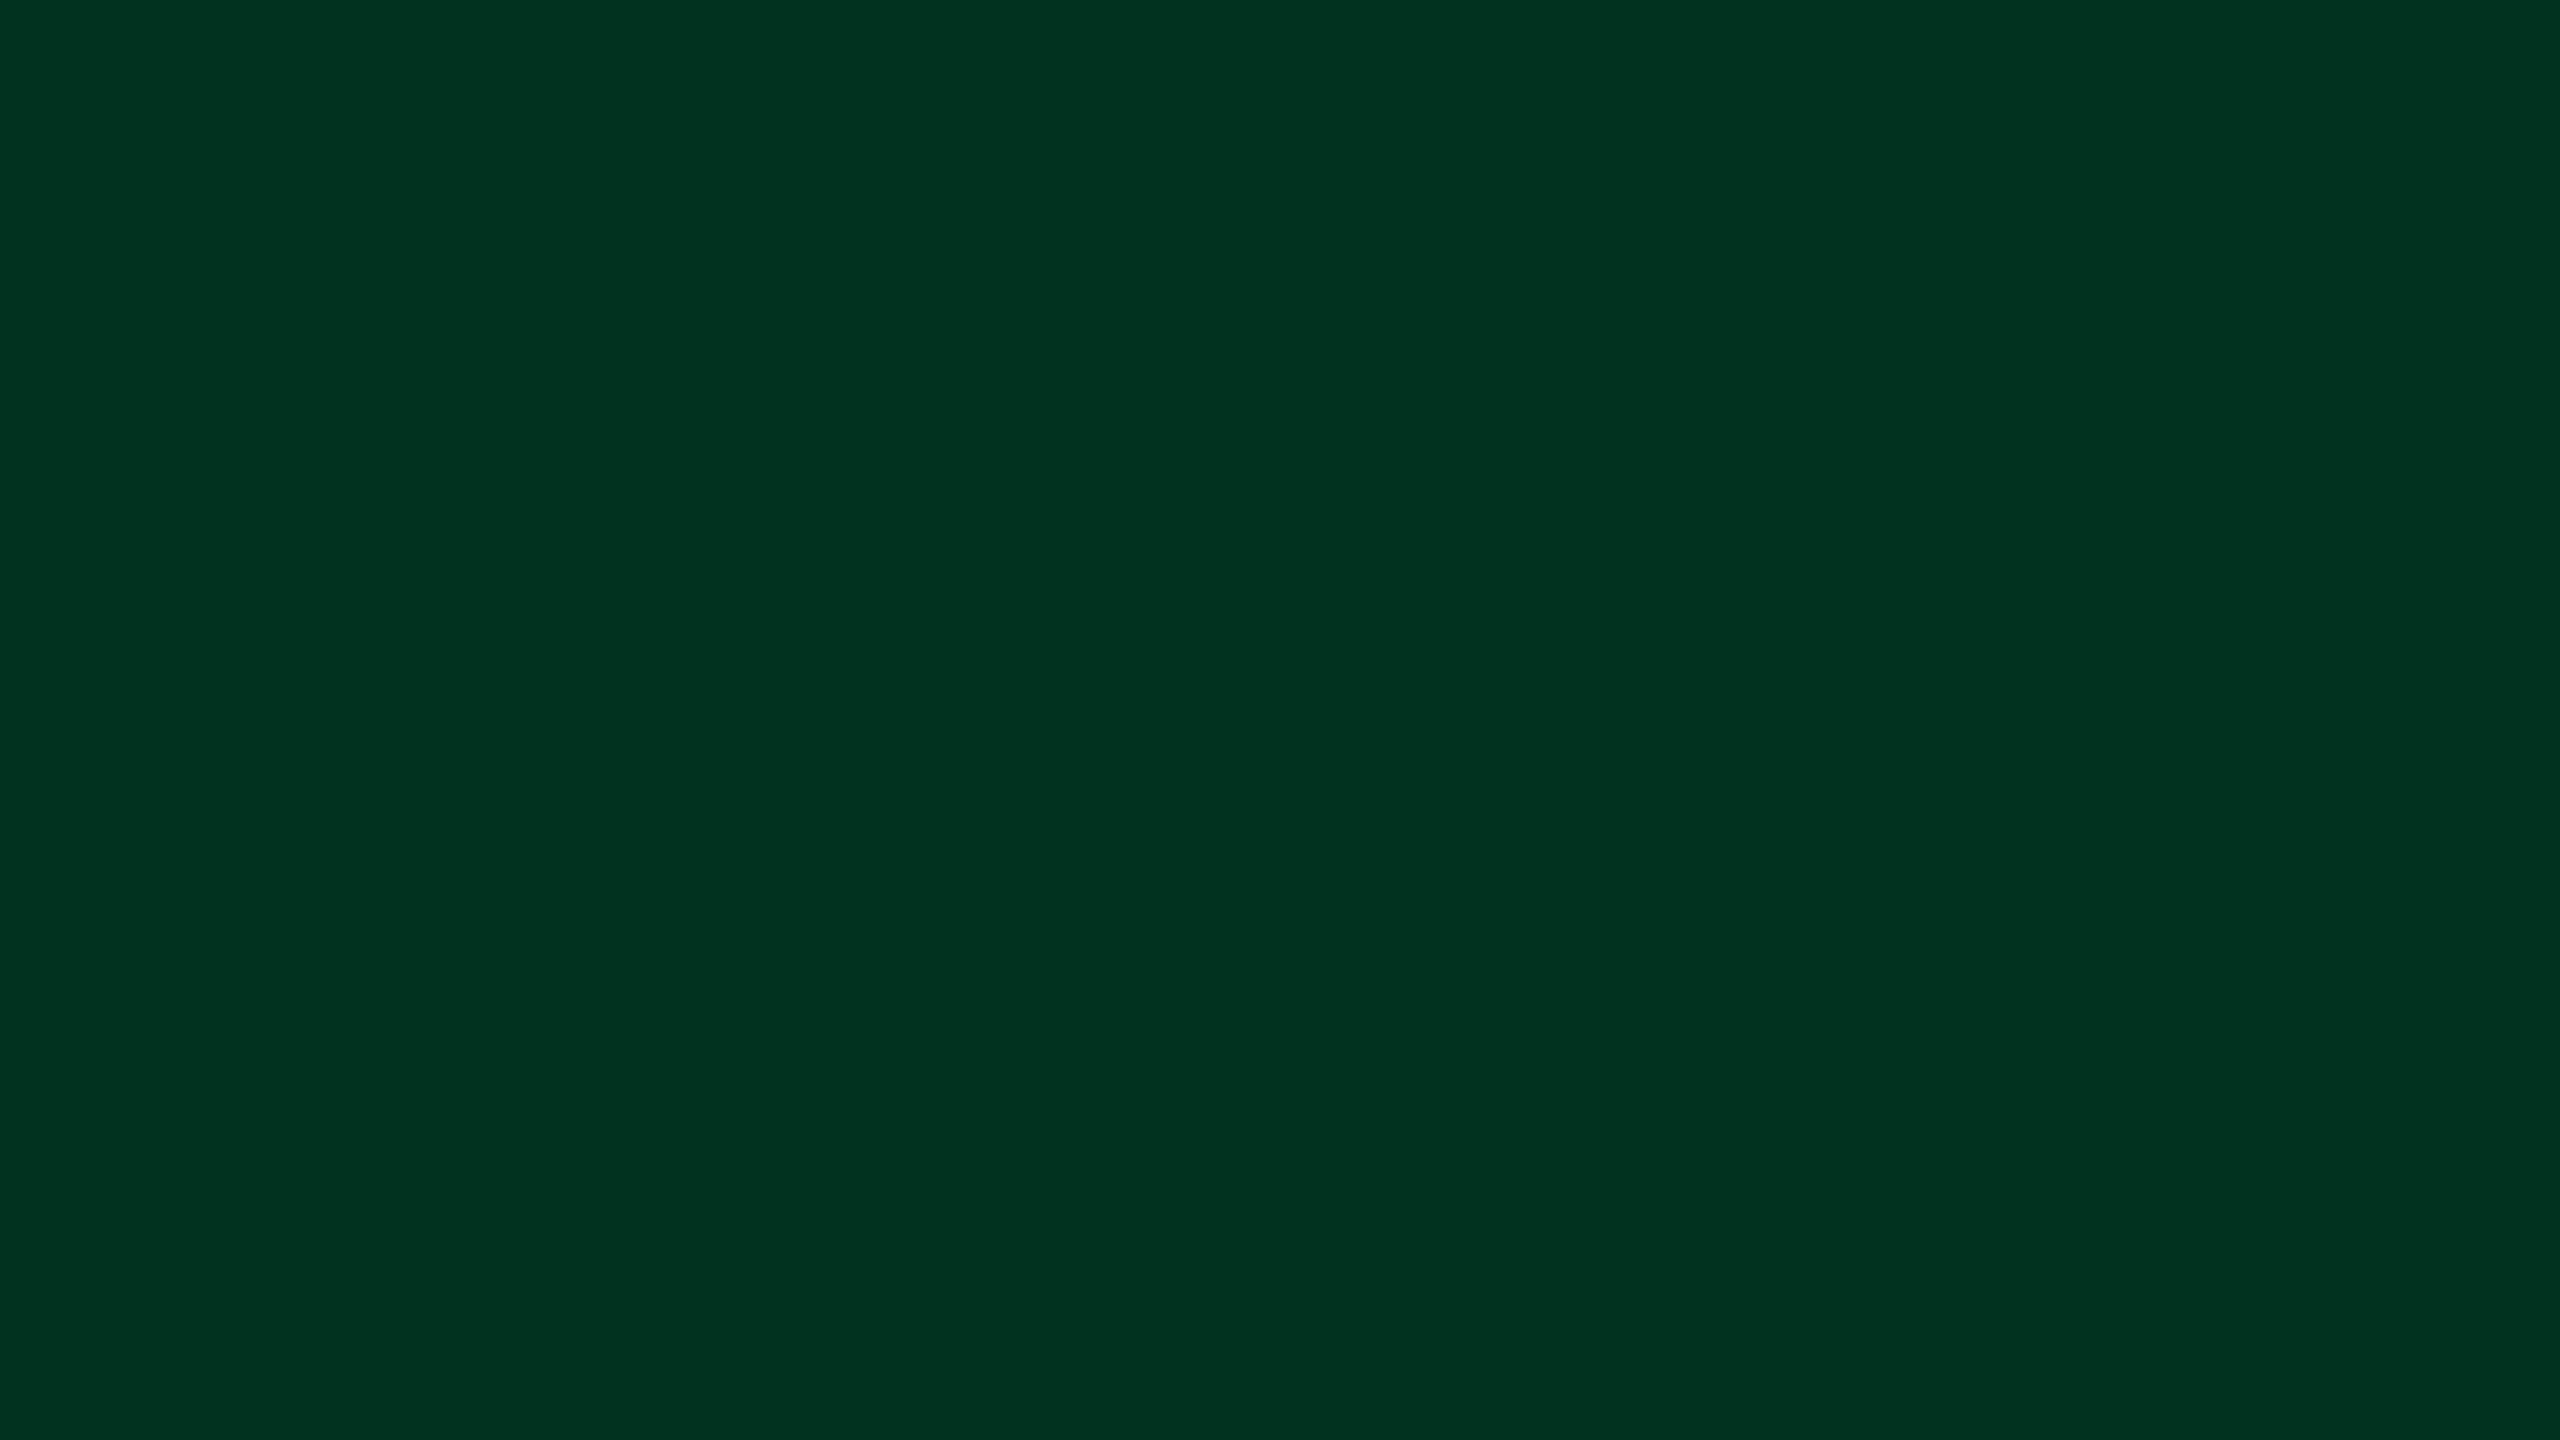 2560x1440 Dark Green Solid Color Background